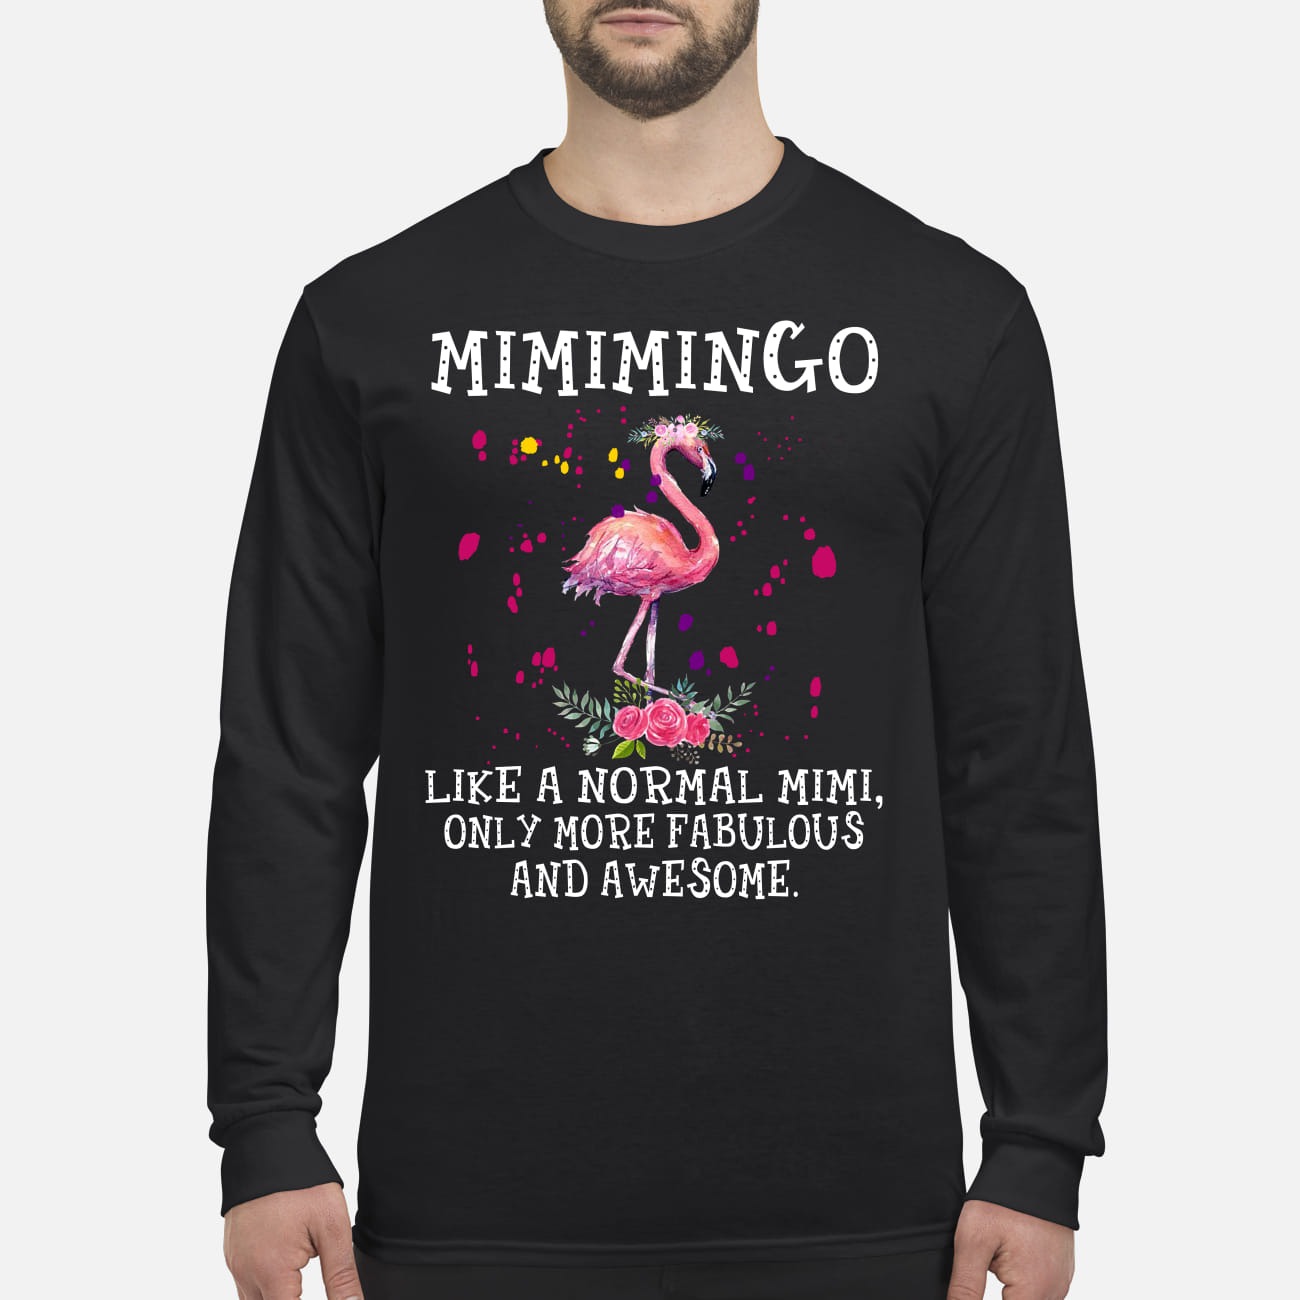 Mimingo like a normal mimi only more fabulous and awesome men's long sleeved shirt